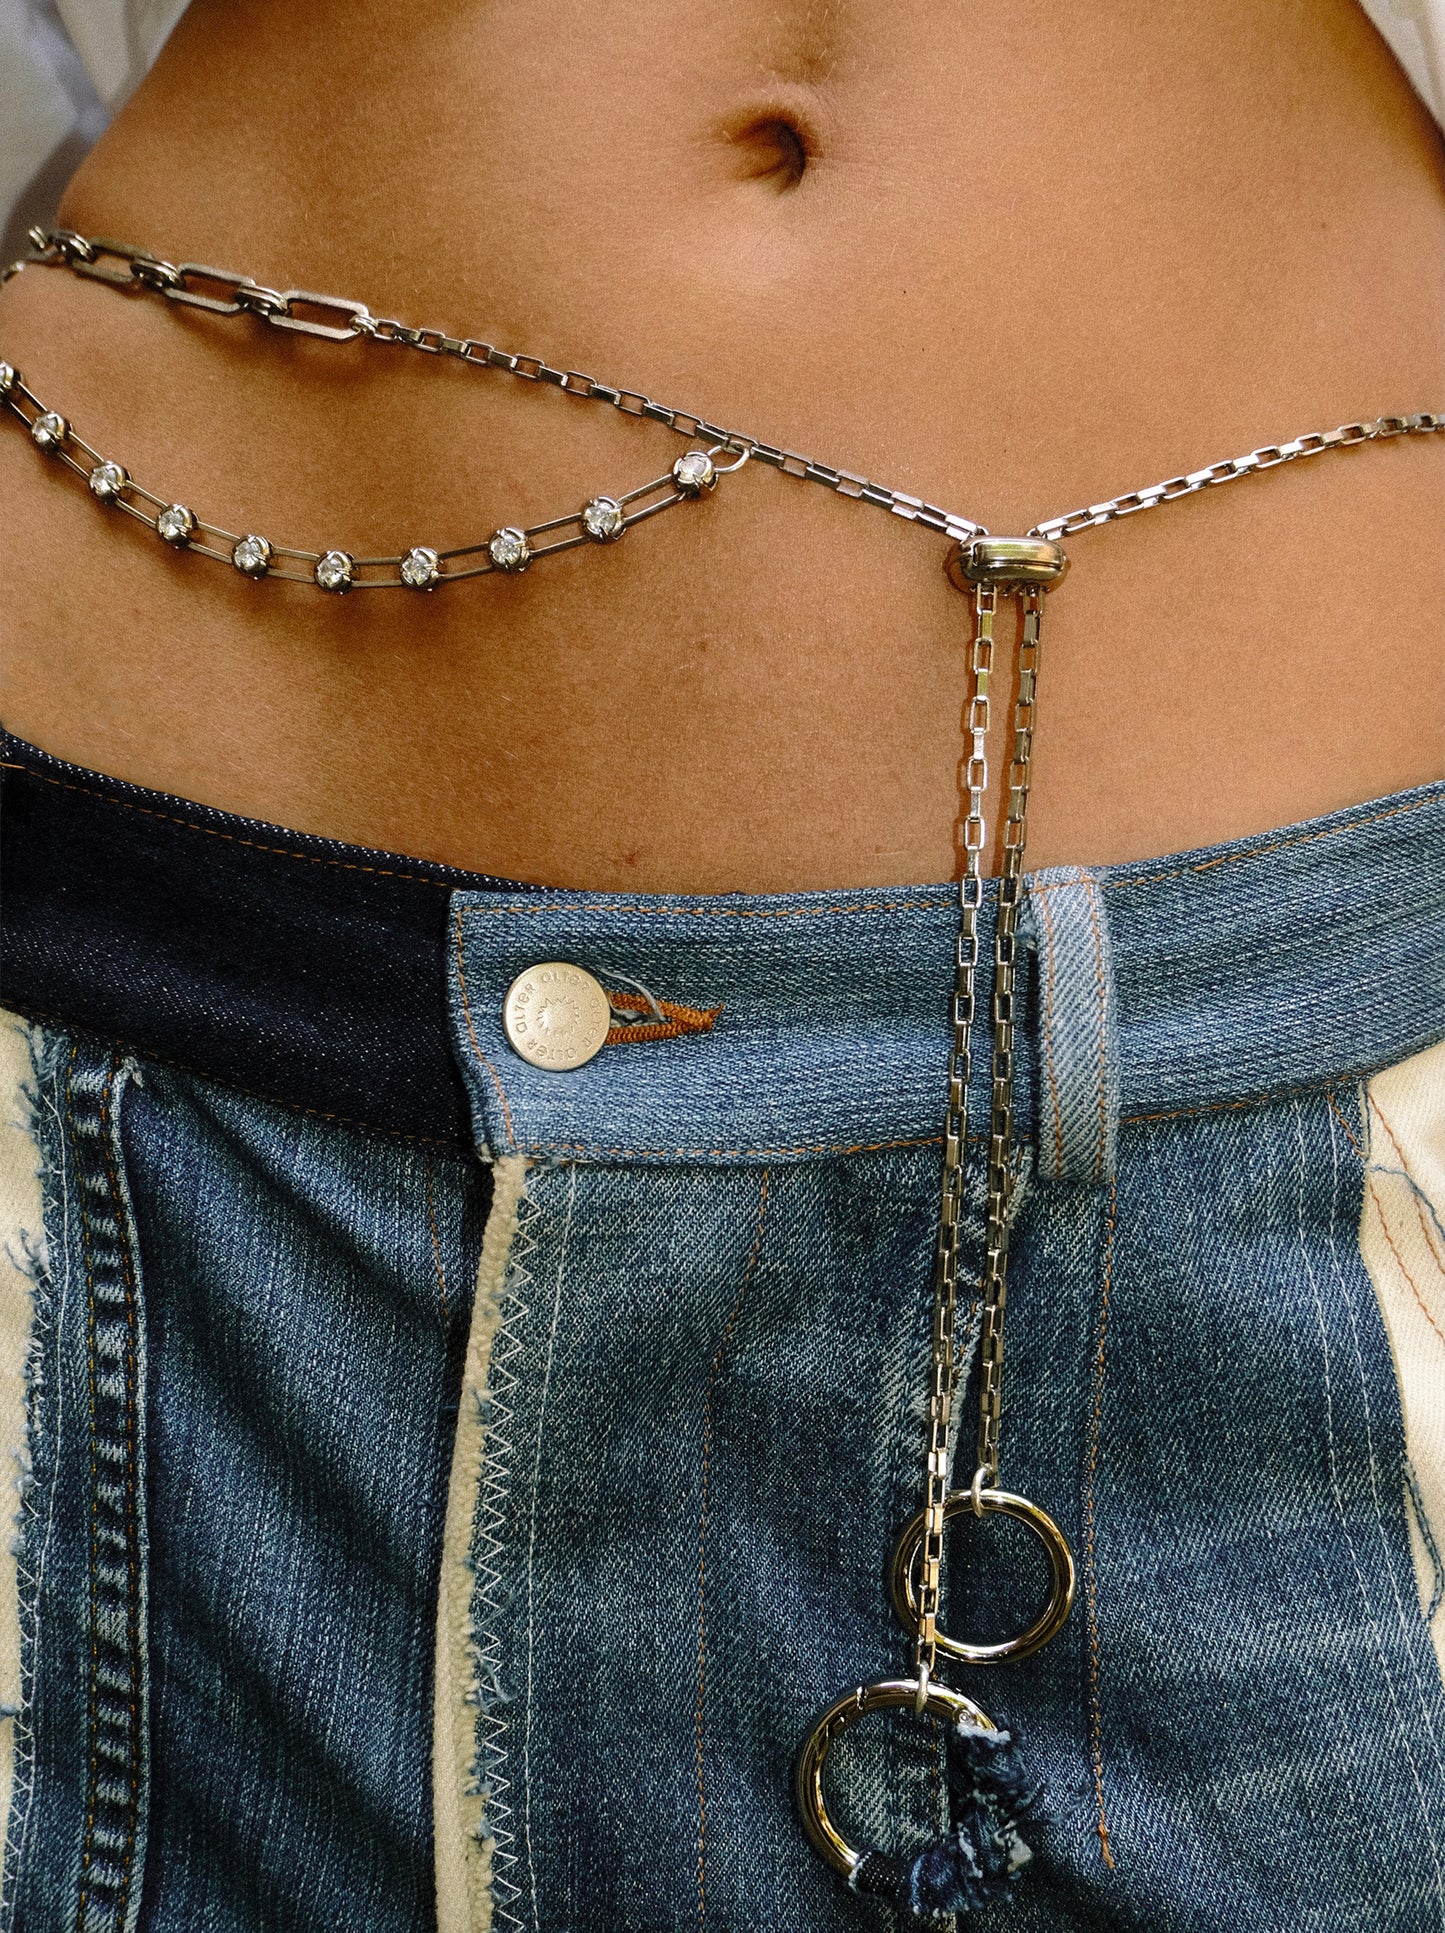 Belly Chain & Tie Necklace